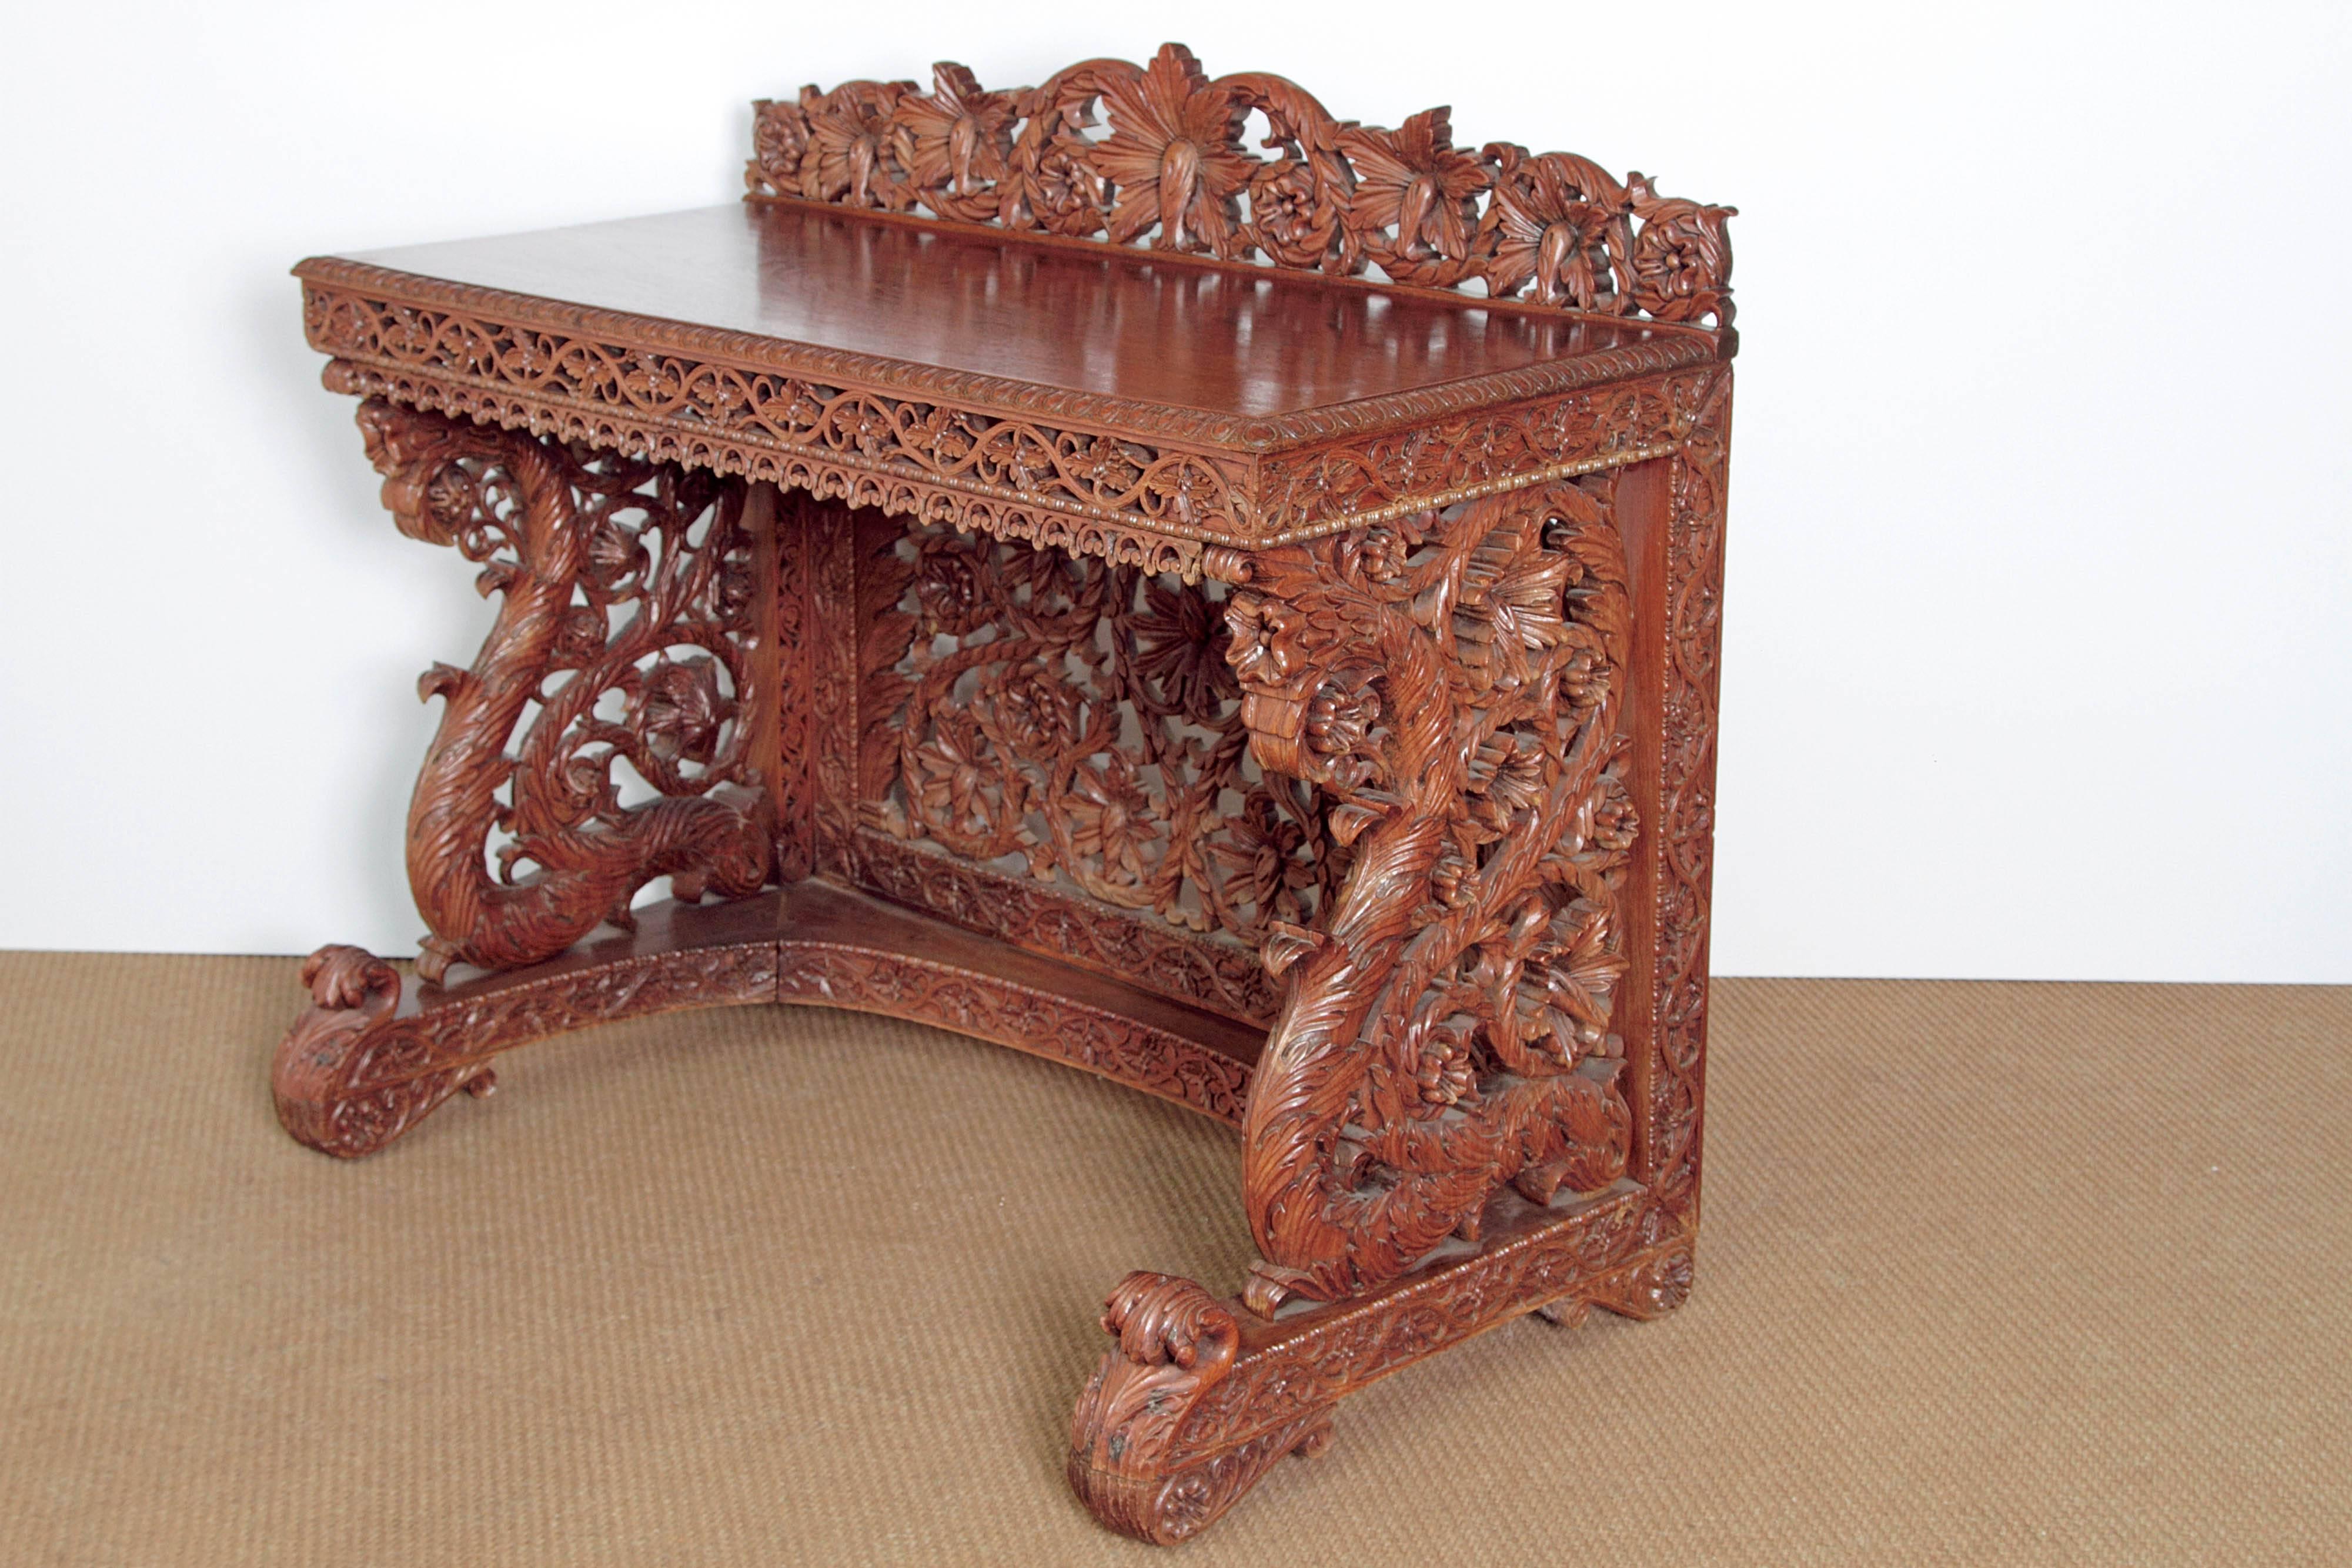 An intricately carved and pierced Anglo-Indian sideboard in rosewood with ornate openwork in an all-over floral design and scrolling acanthus leaves. Solid top and carved back, apron and sides. A carved shelf at the bottom. 

India, mid-19th